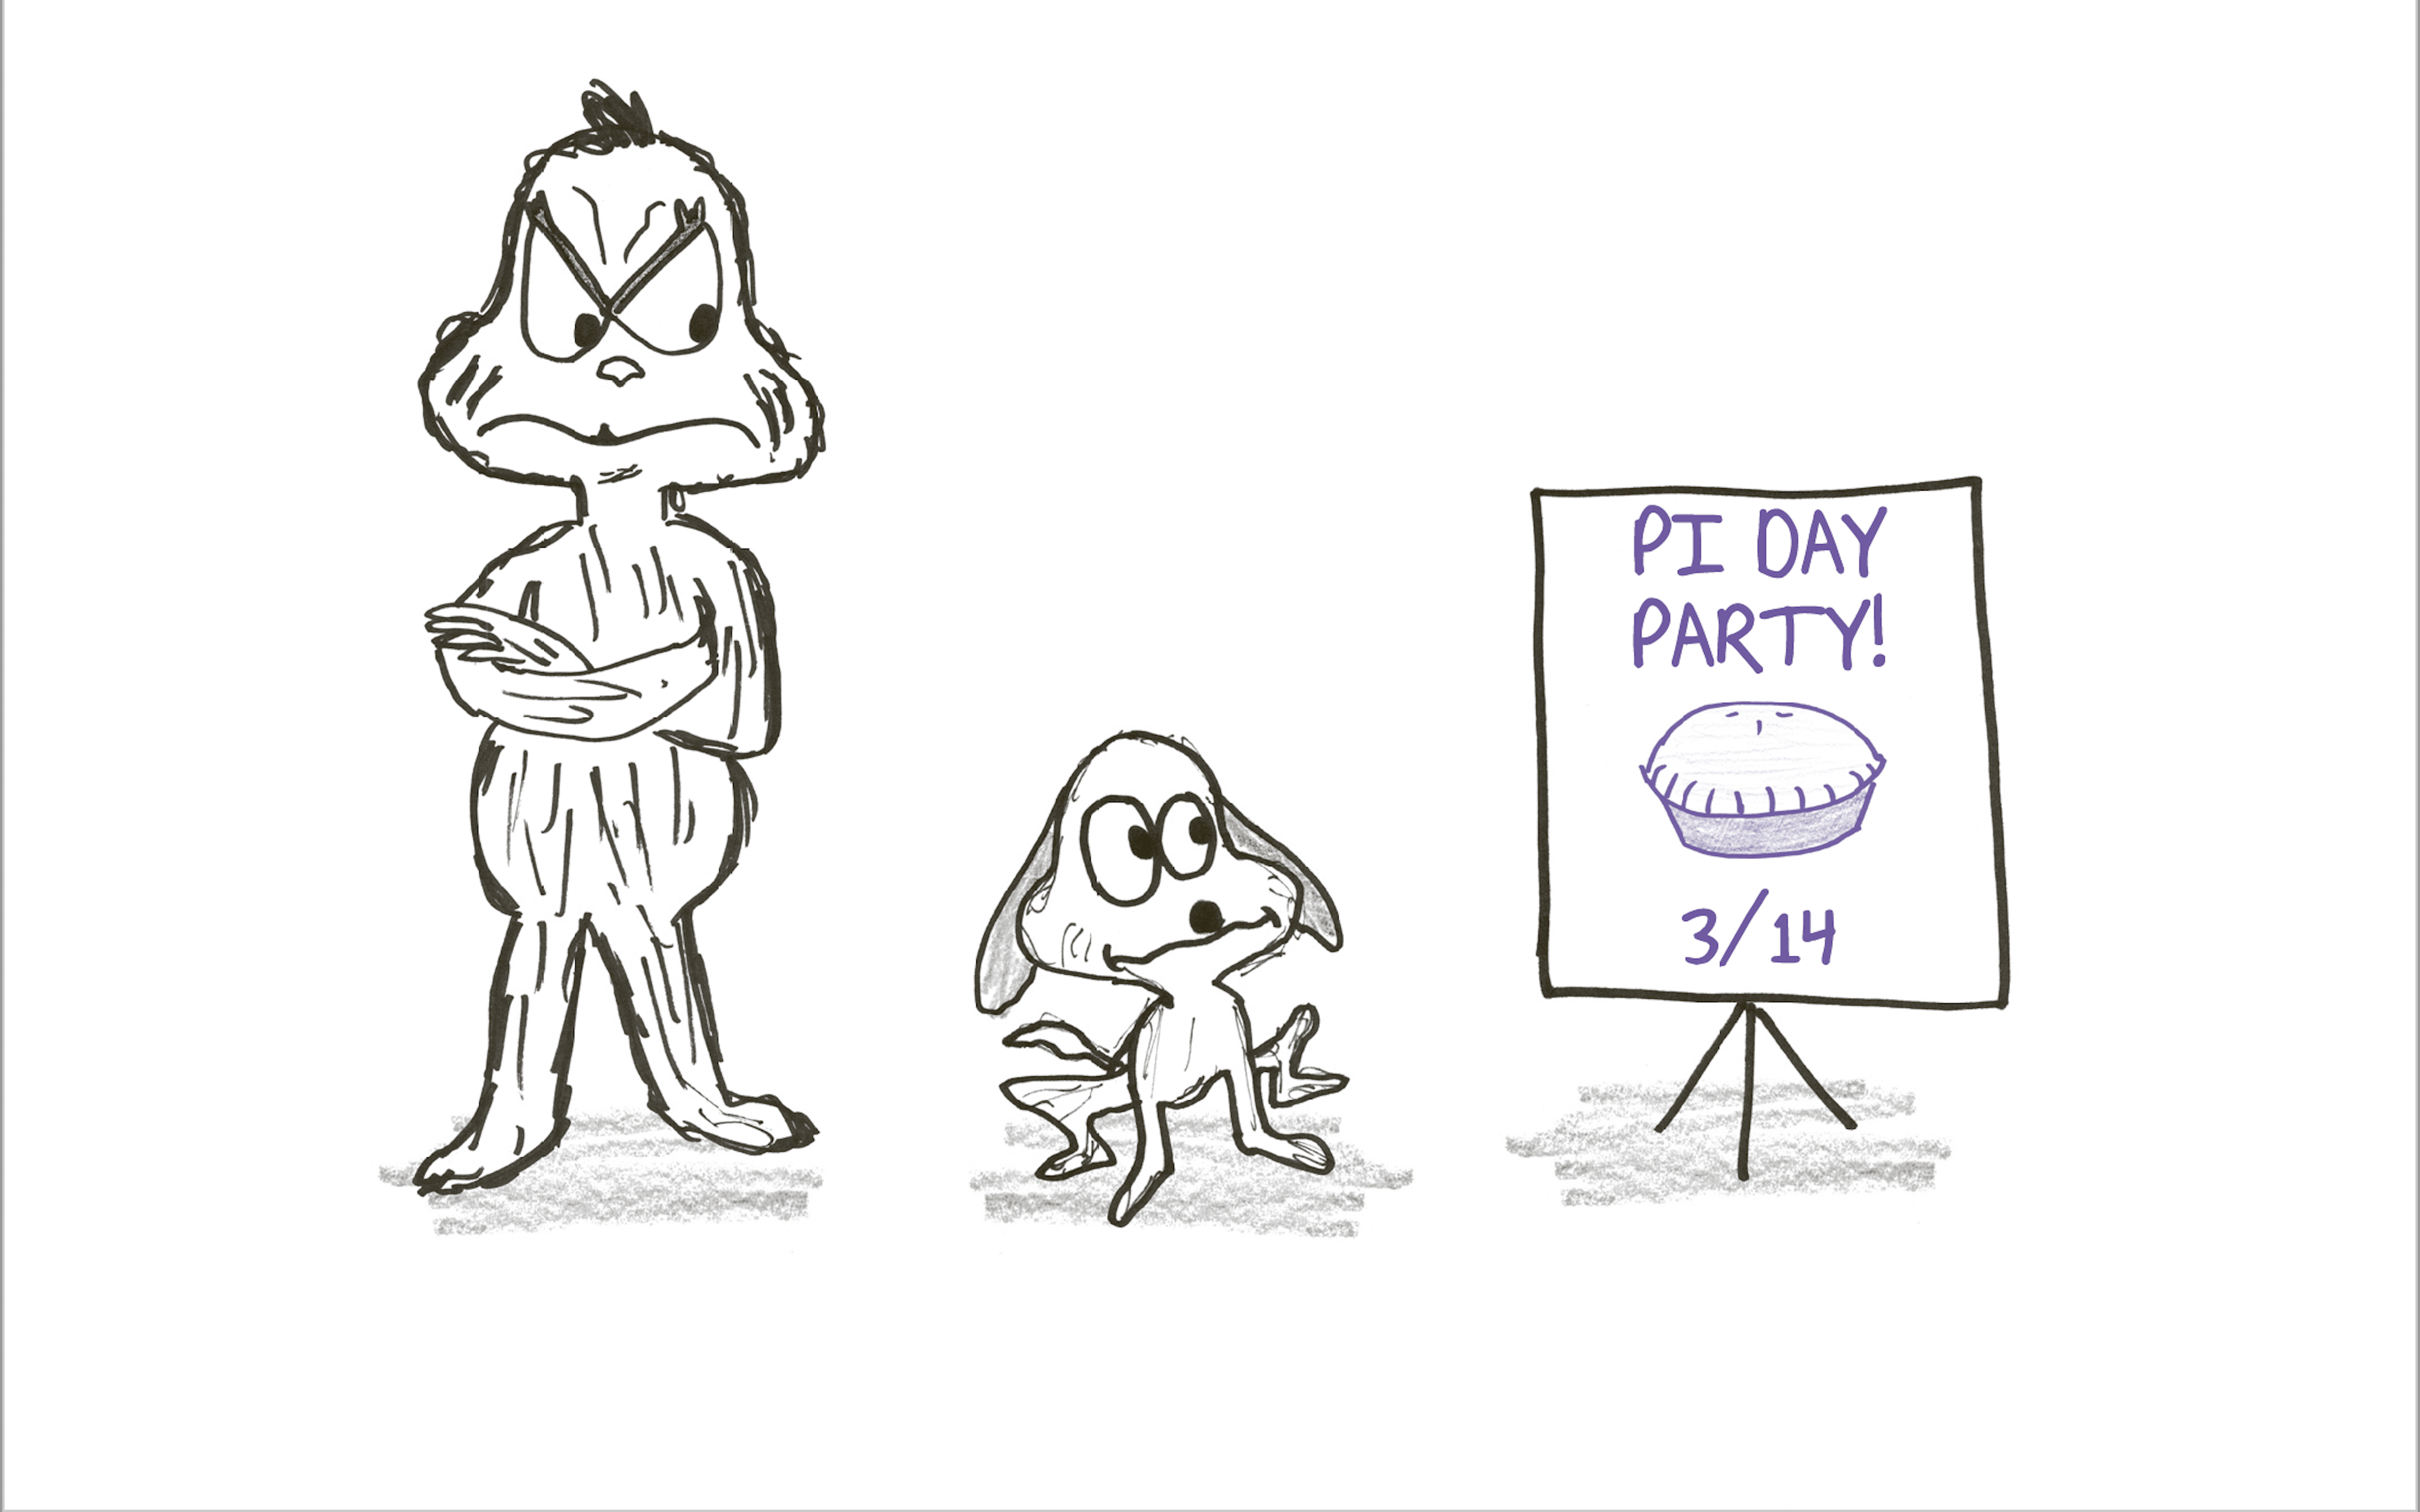 grinch-like character standing grumpily with a dog and sign that says 'pi day party 3/14'